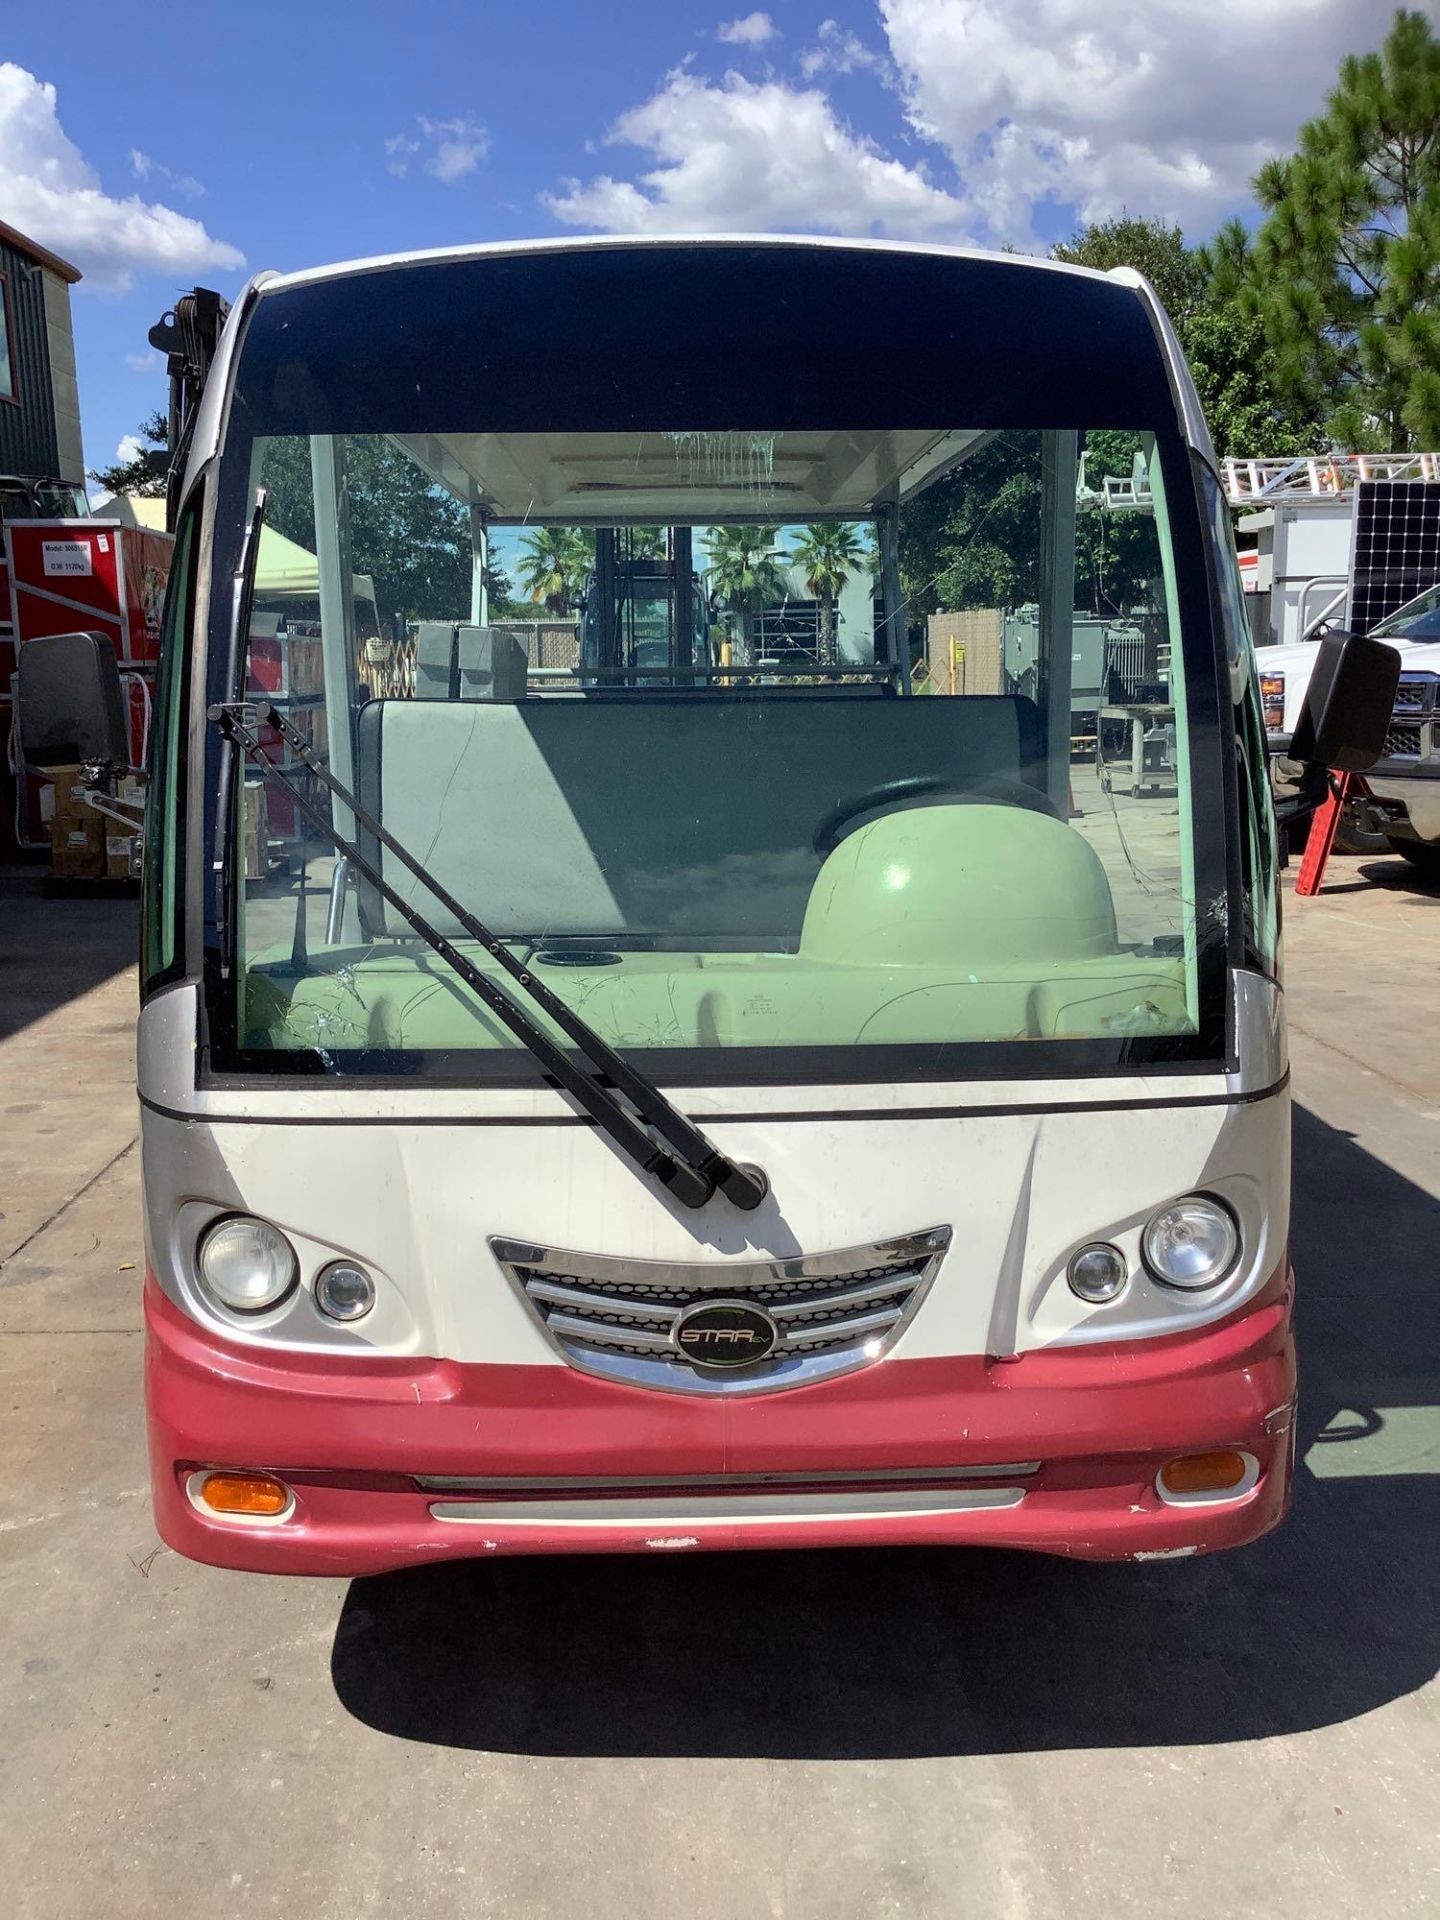 2015 STAR EV SHUTTLE CART MODEL STAR-BN72-11-AC-WHEELCHAIR, ELECTRIC, SOLA PANEL ATTACHED, DOME LIGH - Image 14 of 40